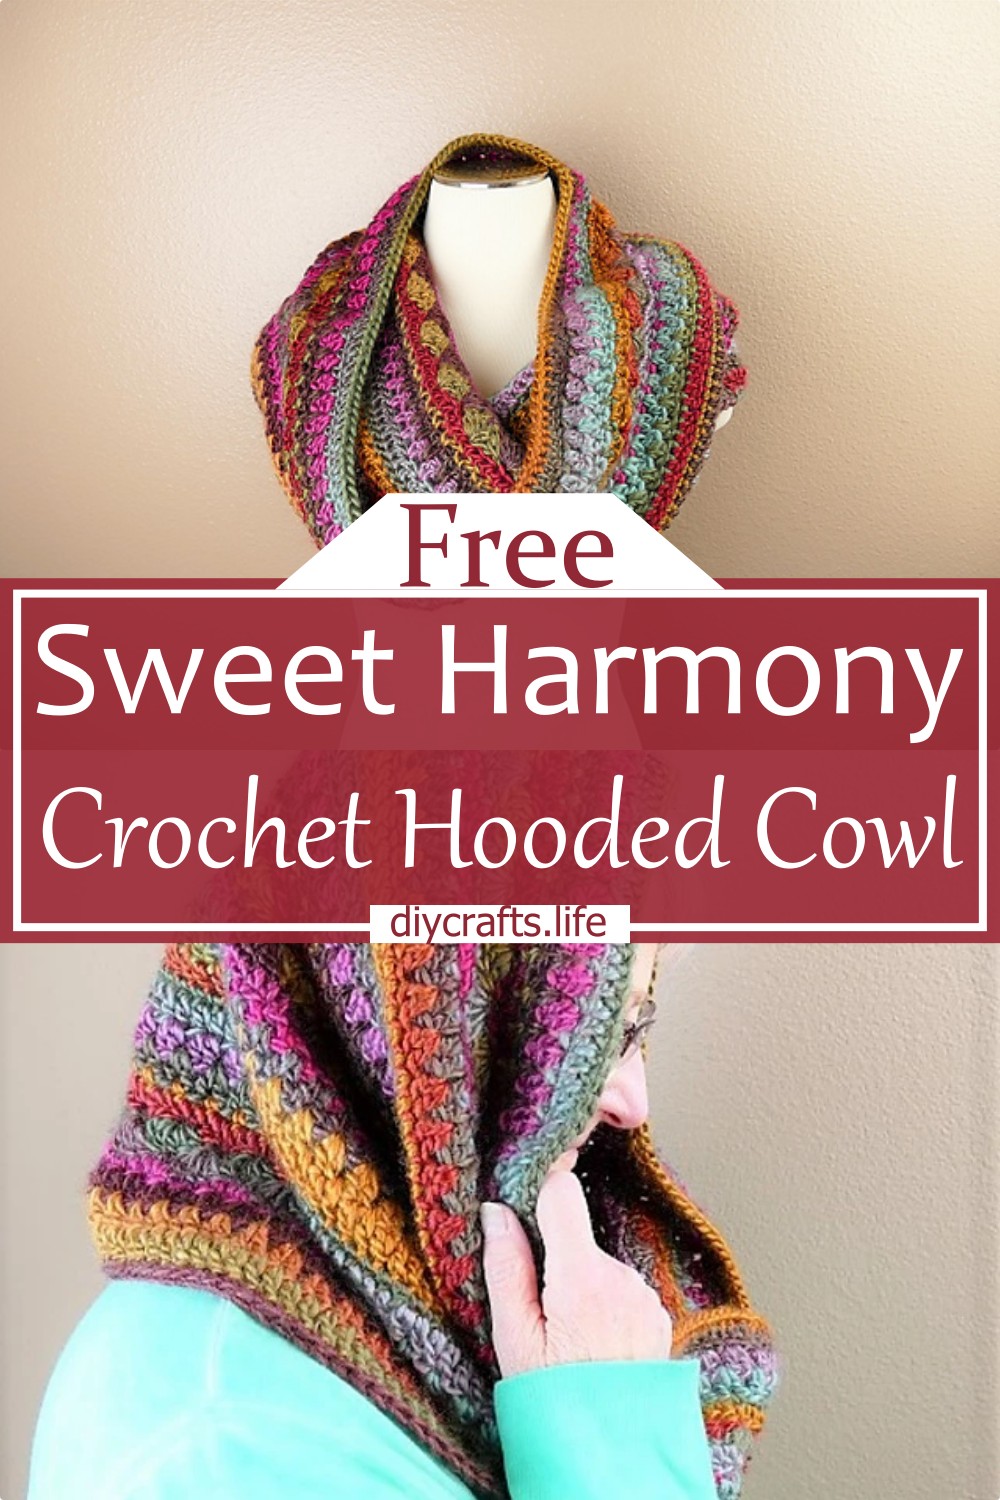 Wrap Yourself With Our Sweet Harmony Crochet Hooded Cowl